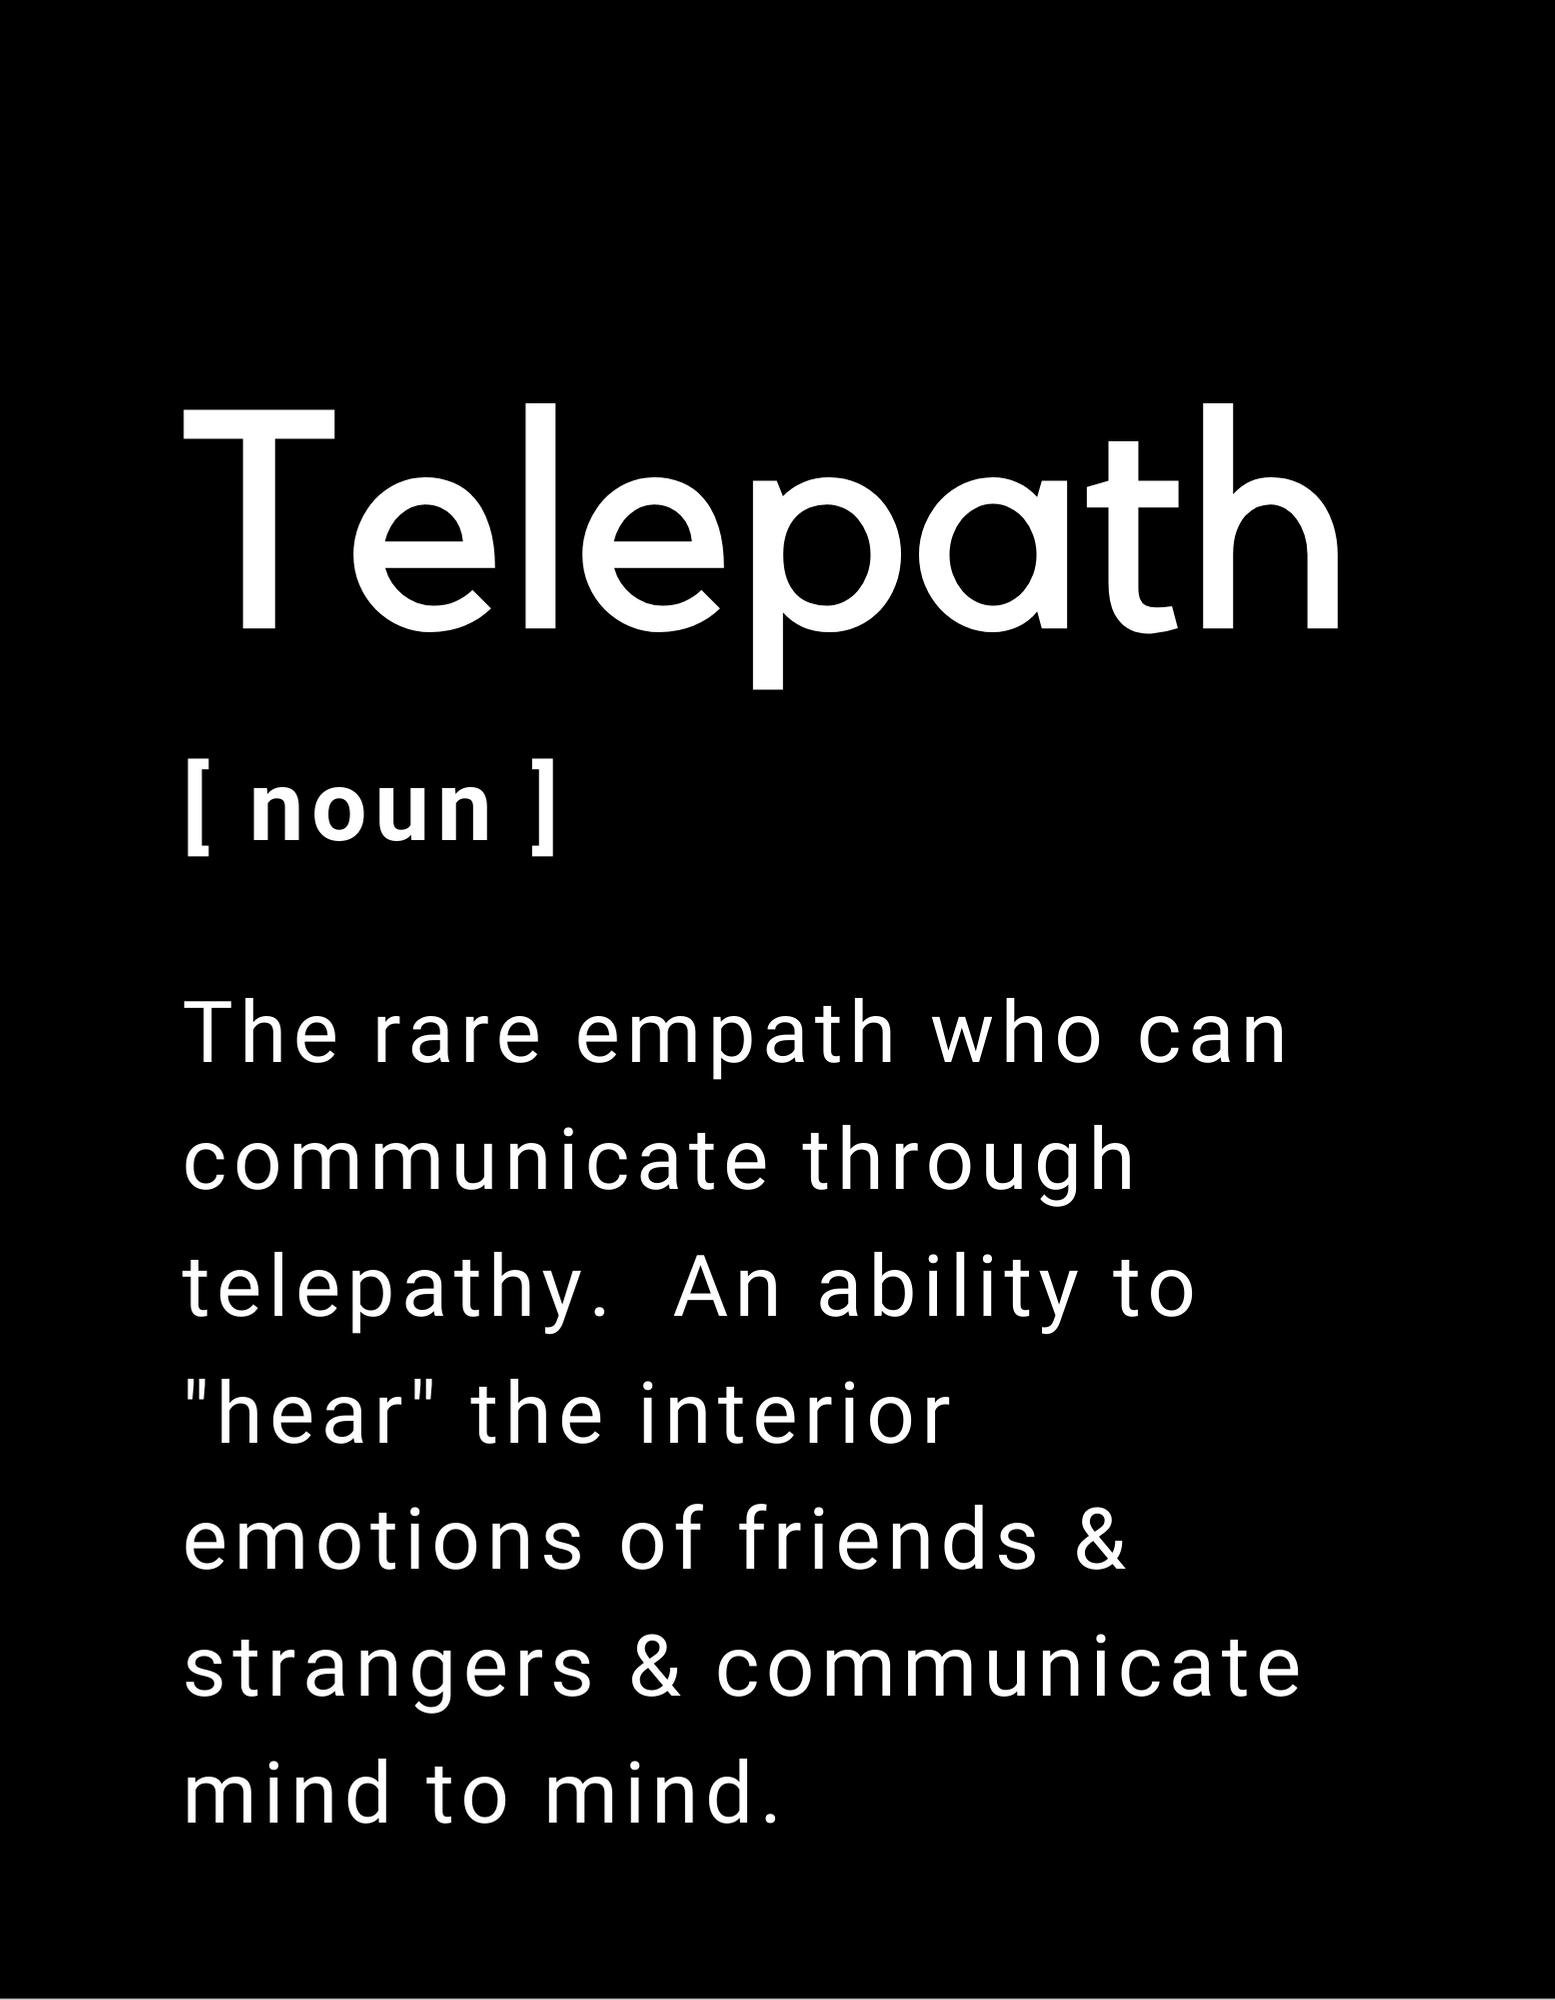 What is a Telepath?